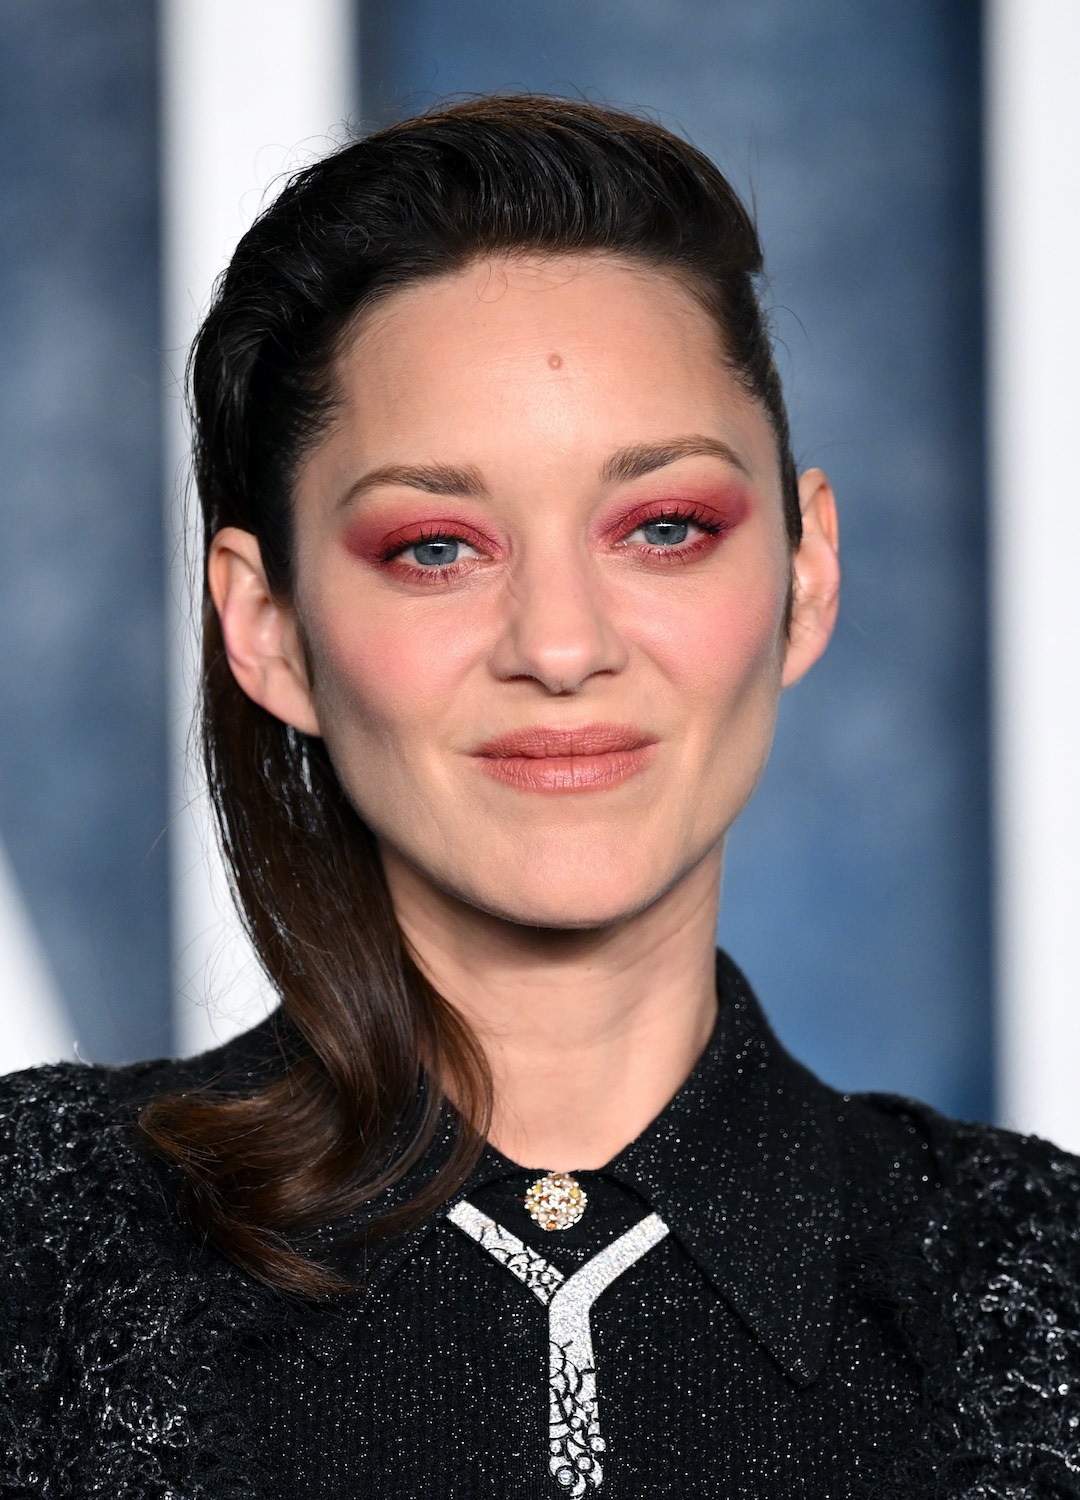 Marion Cotillard attends the 2023 Vanity Fair Oscar Party hosted by Radhika Jones at Wallis Annenberg Center for the Performing Arts on March 12, 2023 in Beverly Hills, California